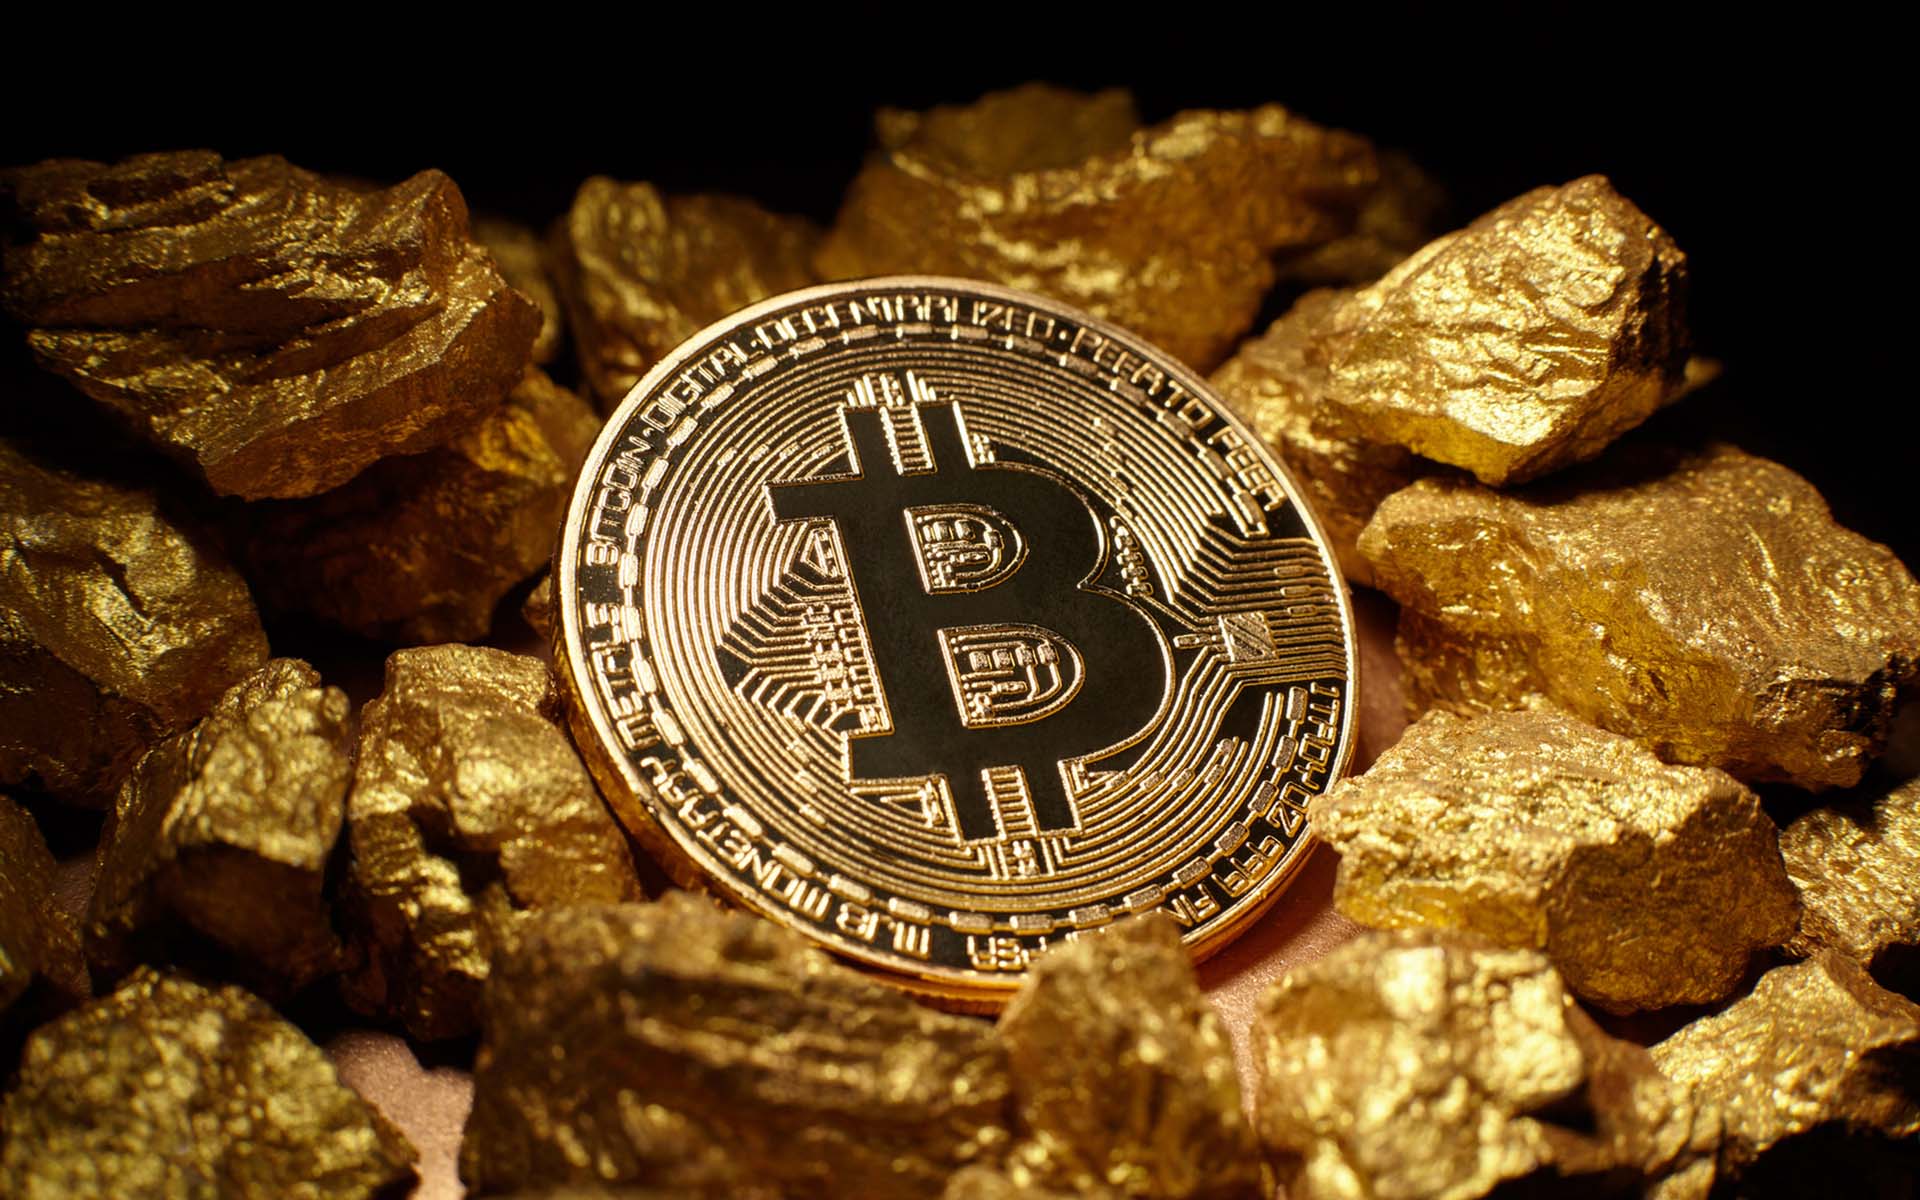 Fund managers actively switch from gold to Bitcoin (BTC)